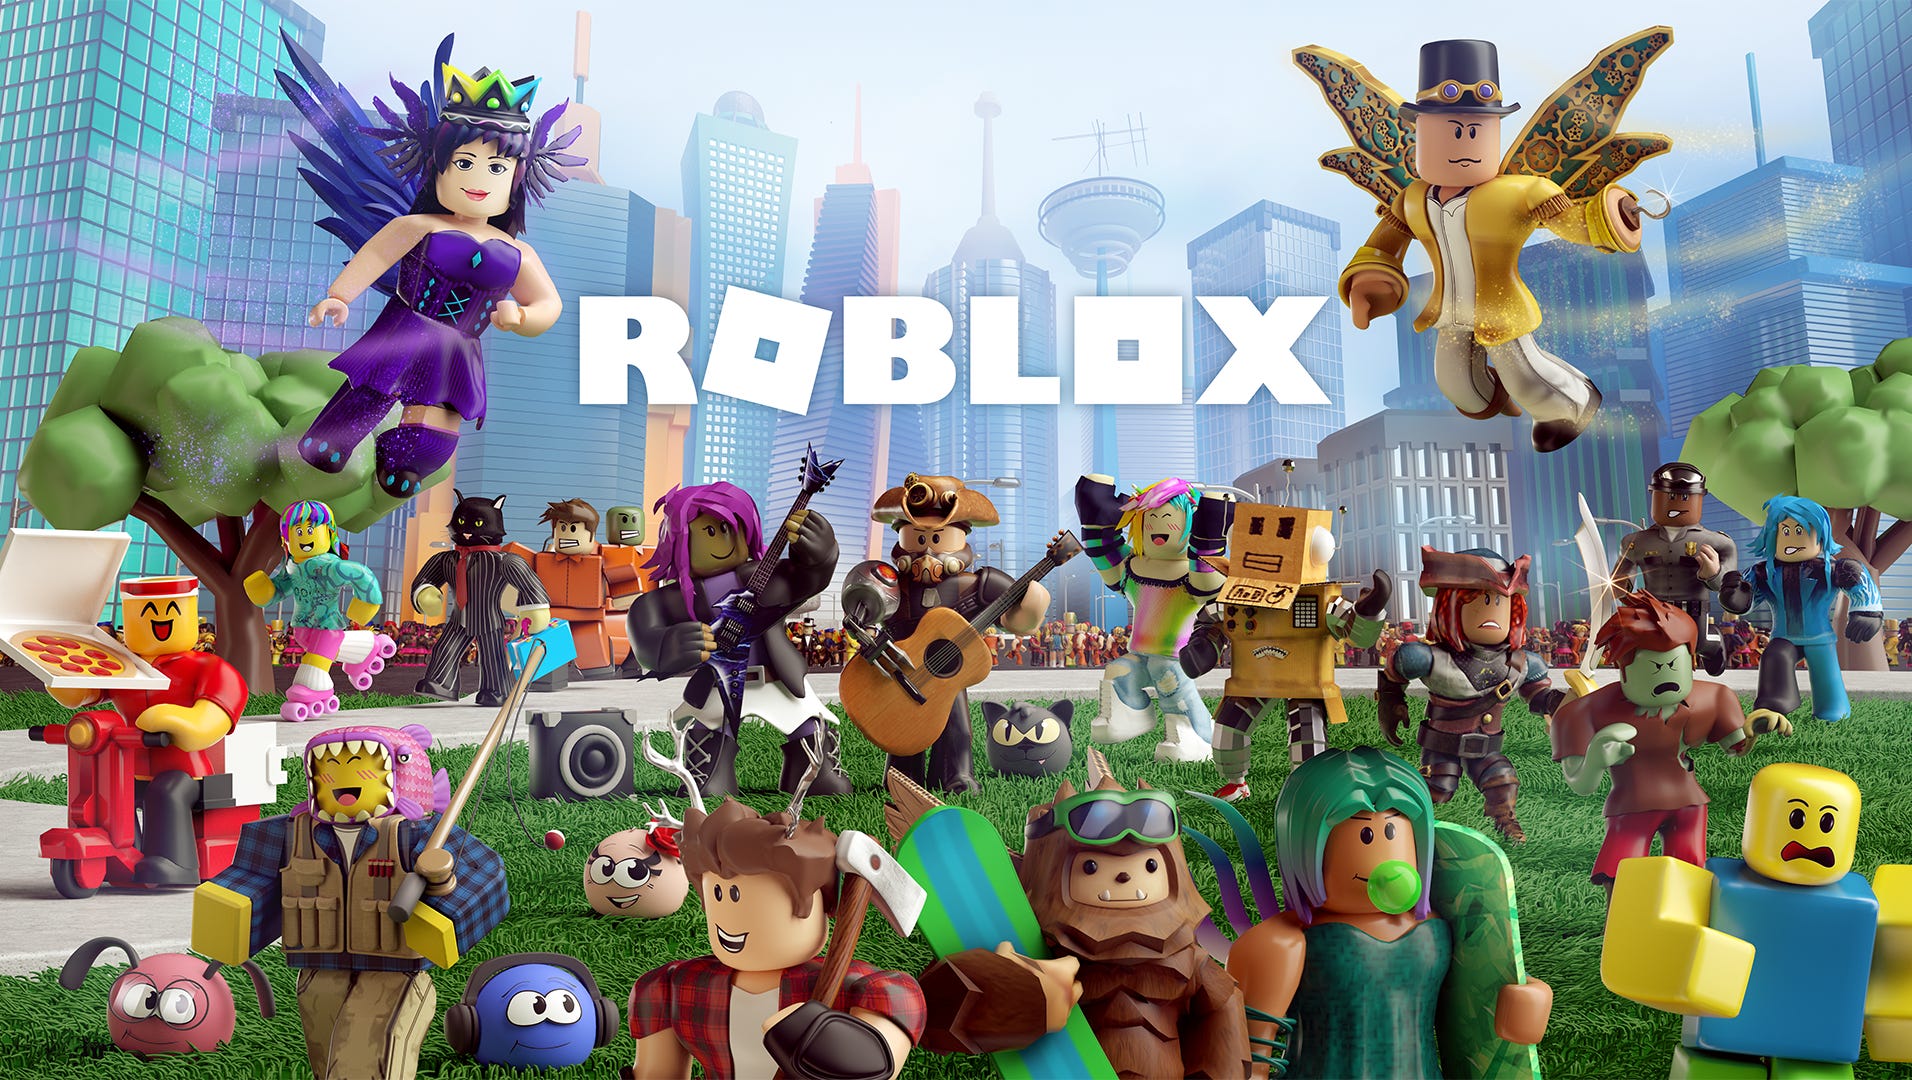 Roblox Kids Game Shows Character Being Sexually Violated Mom Warns - 7 best roblox animation images in 2020 roblox animation roblox create an avatar